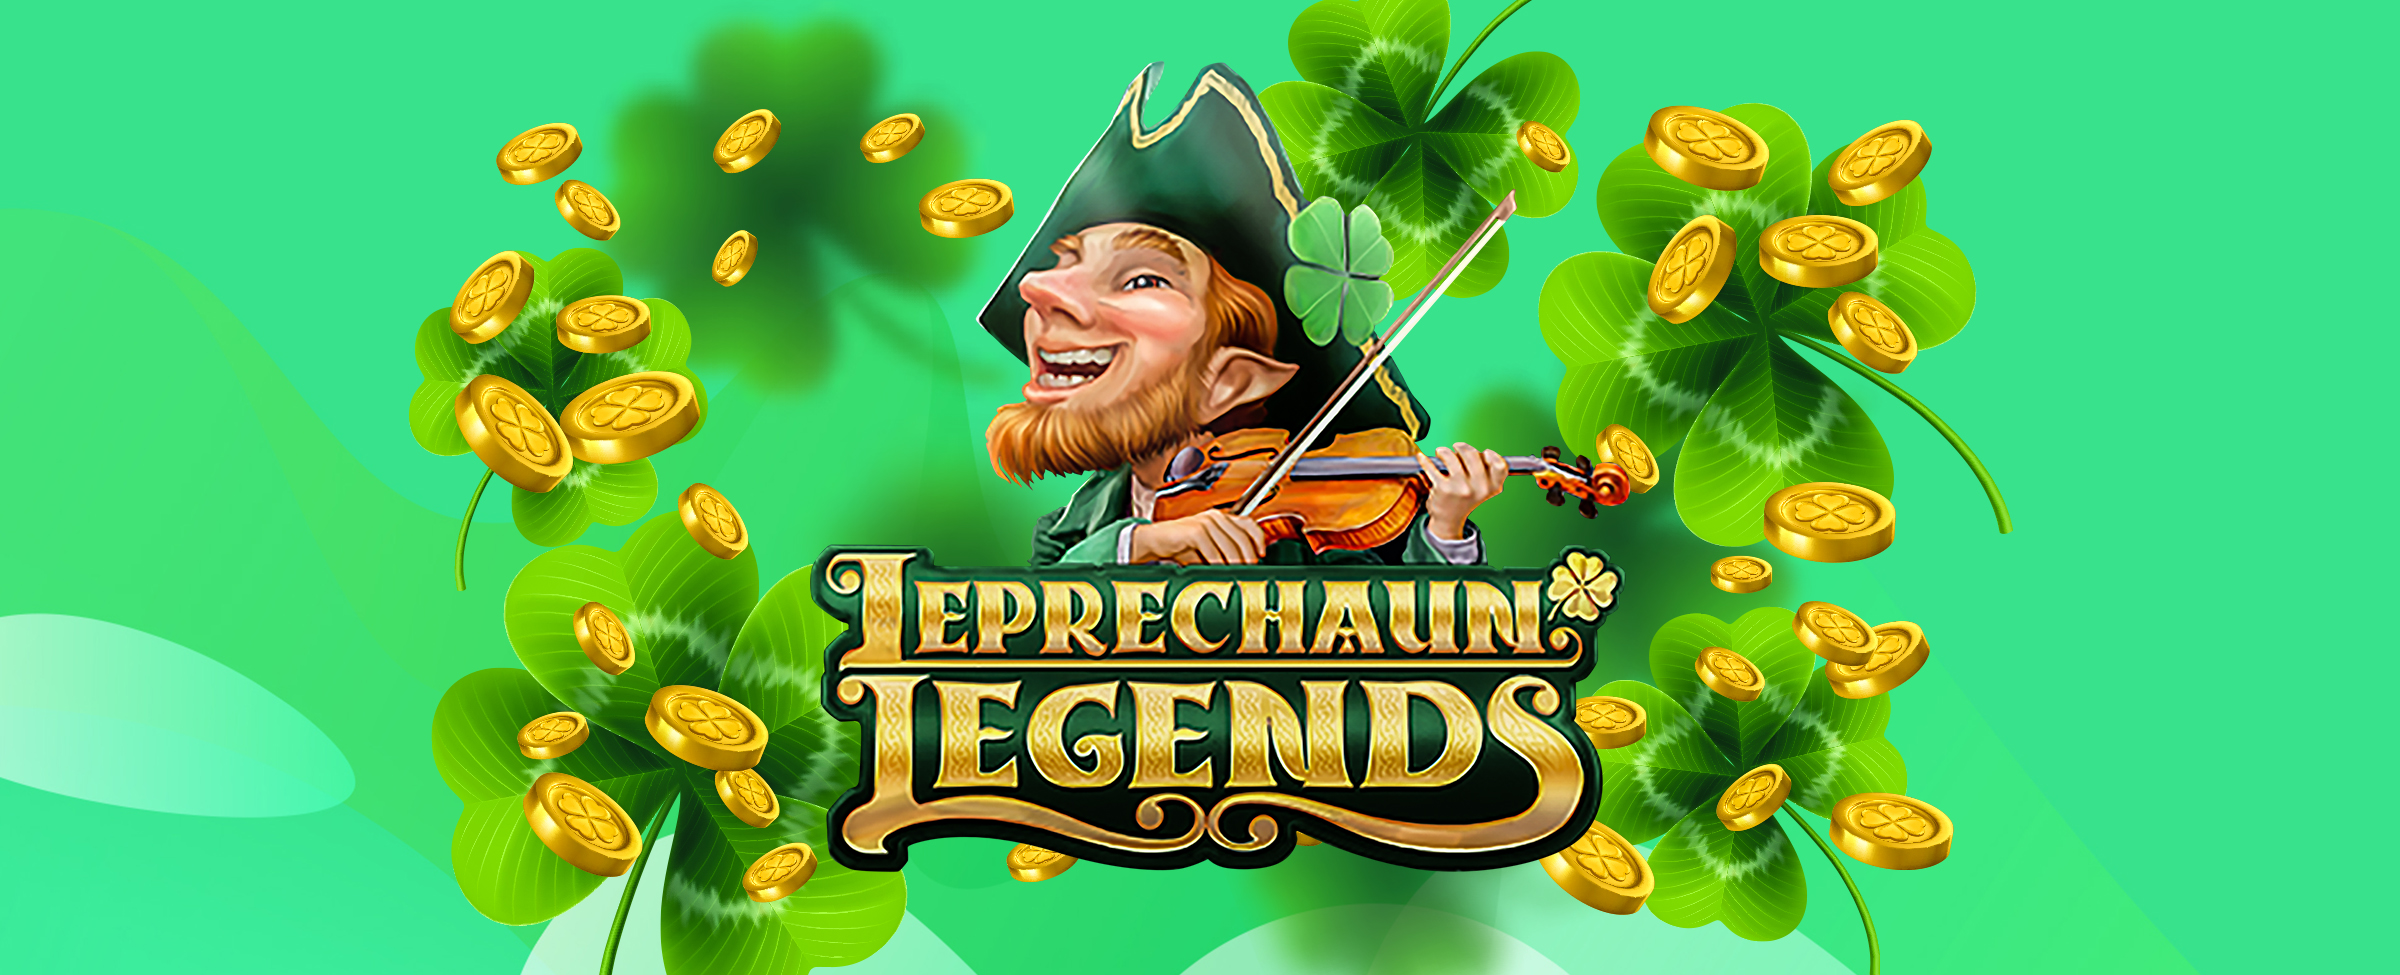 If you love Larry’s Lucky Tavern, you’ll undoubtedly also get a kick out of playing Leprechaun Legends.